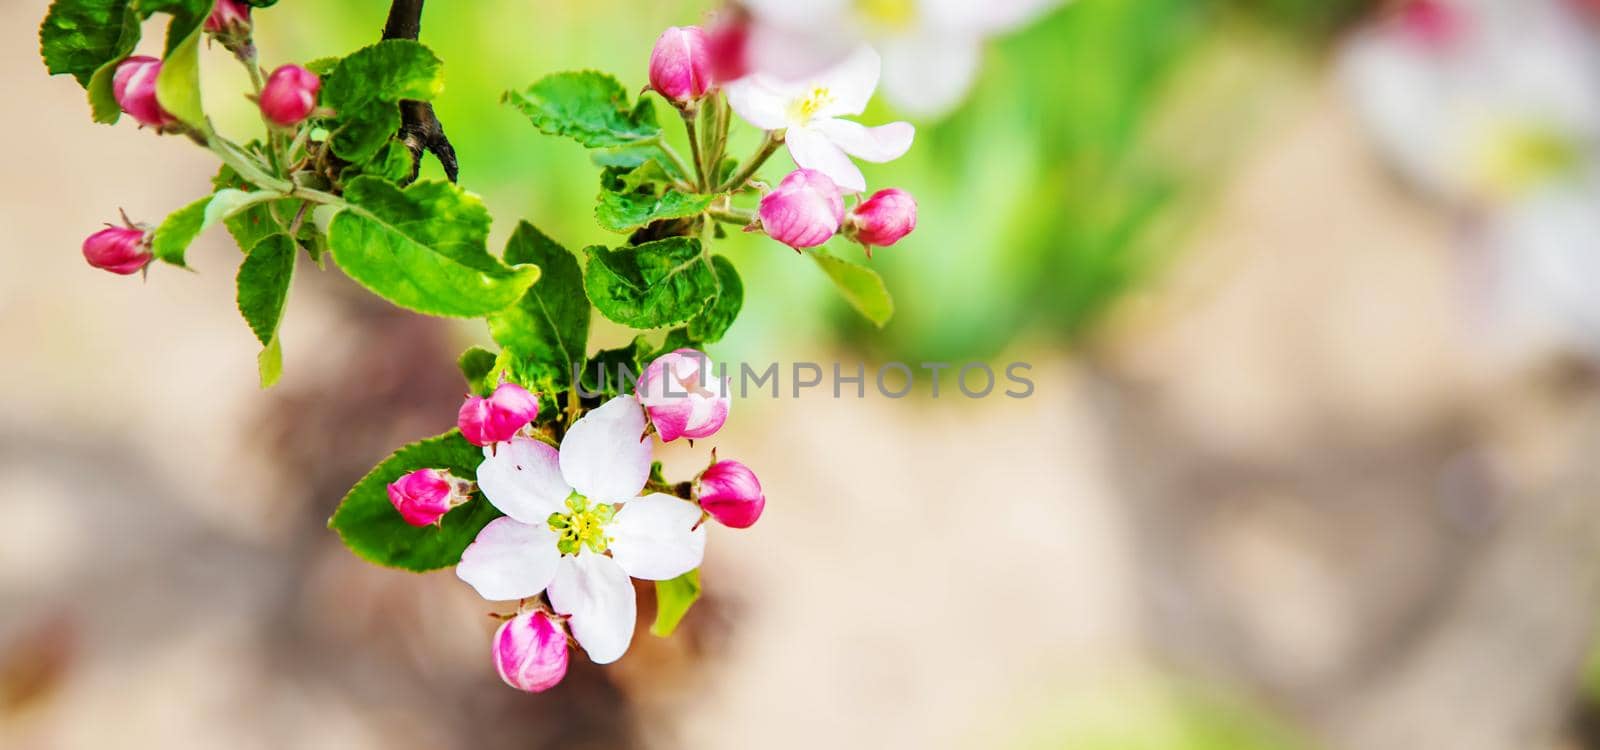 Blooming tree in the garden. Selective focus nature.